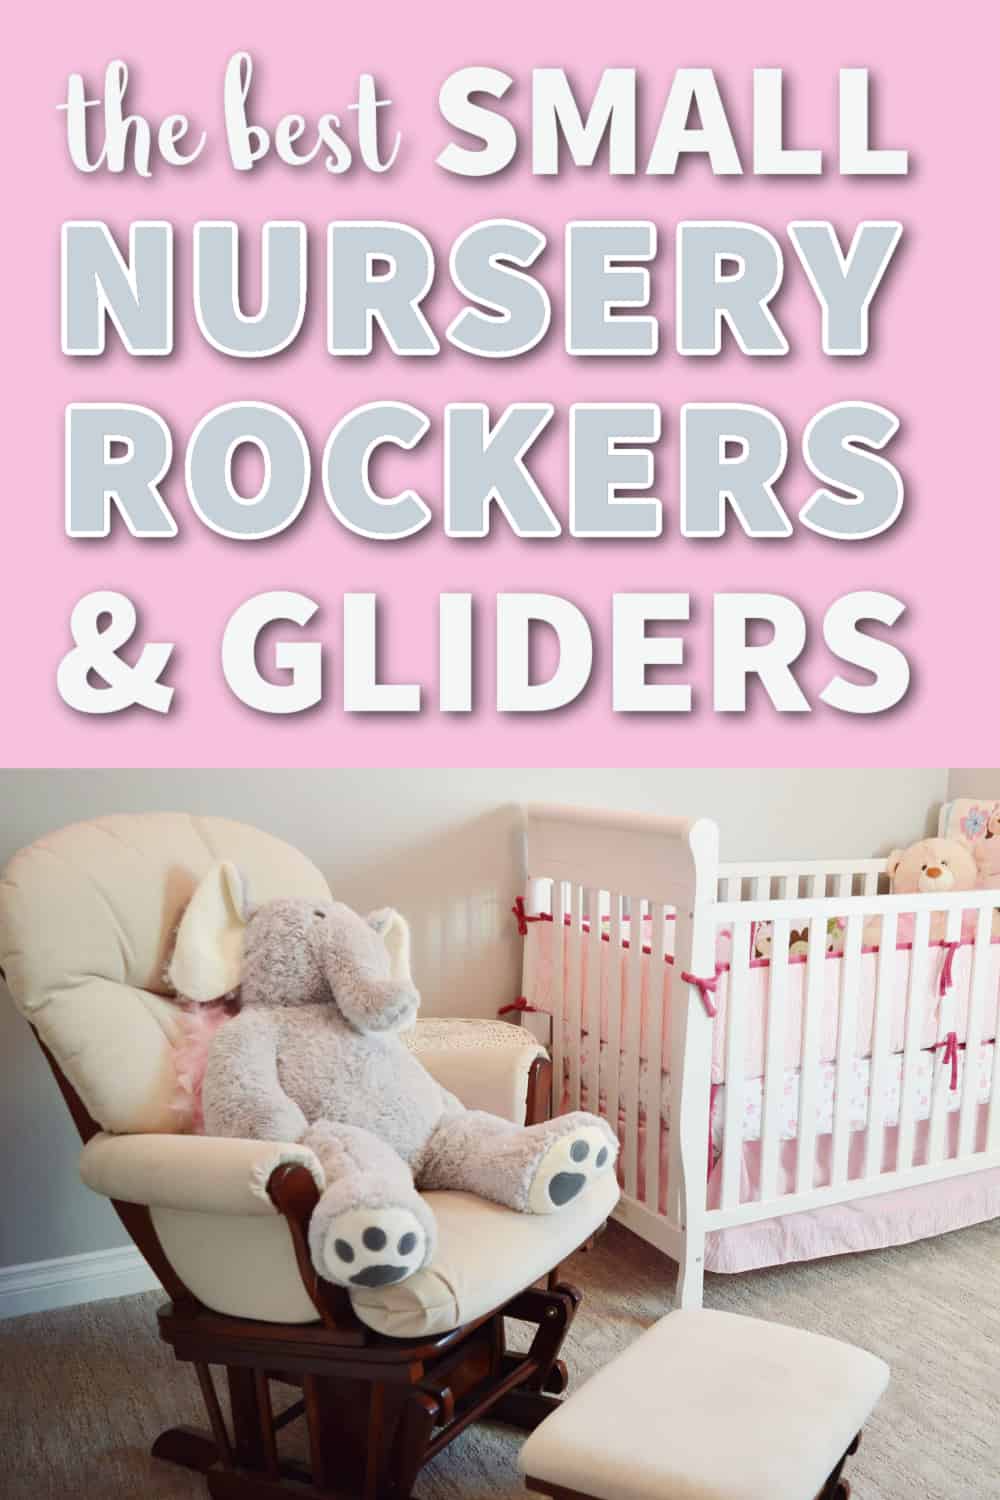 15 best rocking chairs & gliders for a small nursery or space (2022 UPDATE)